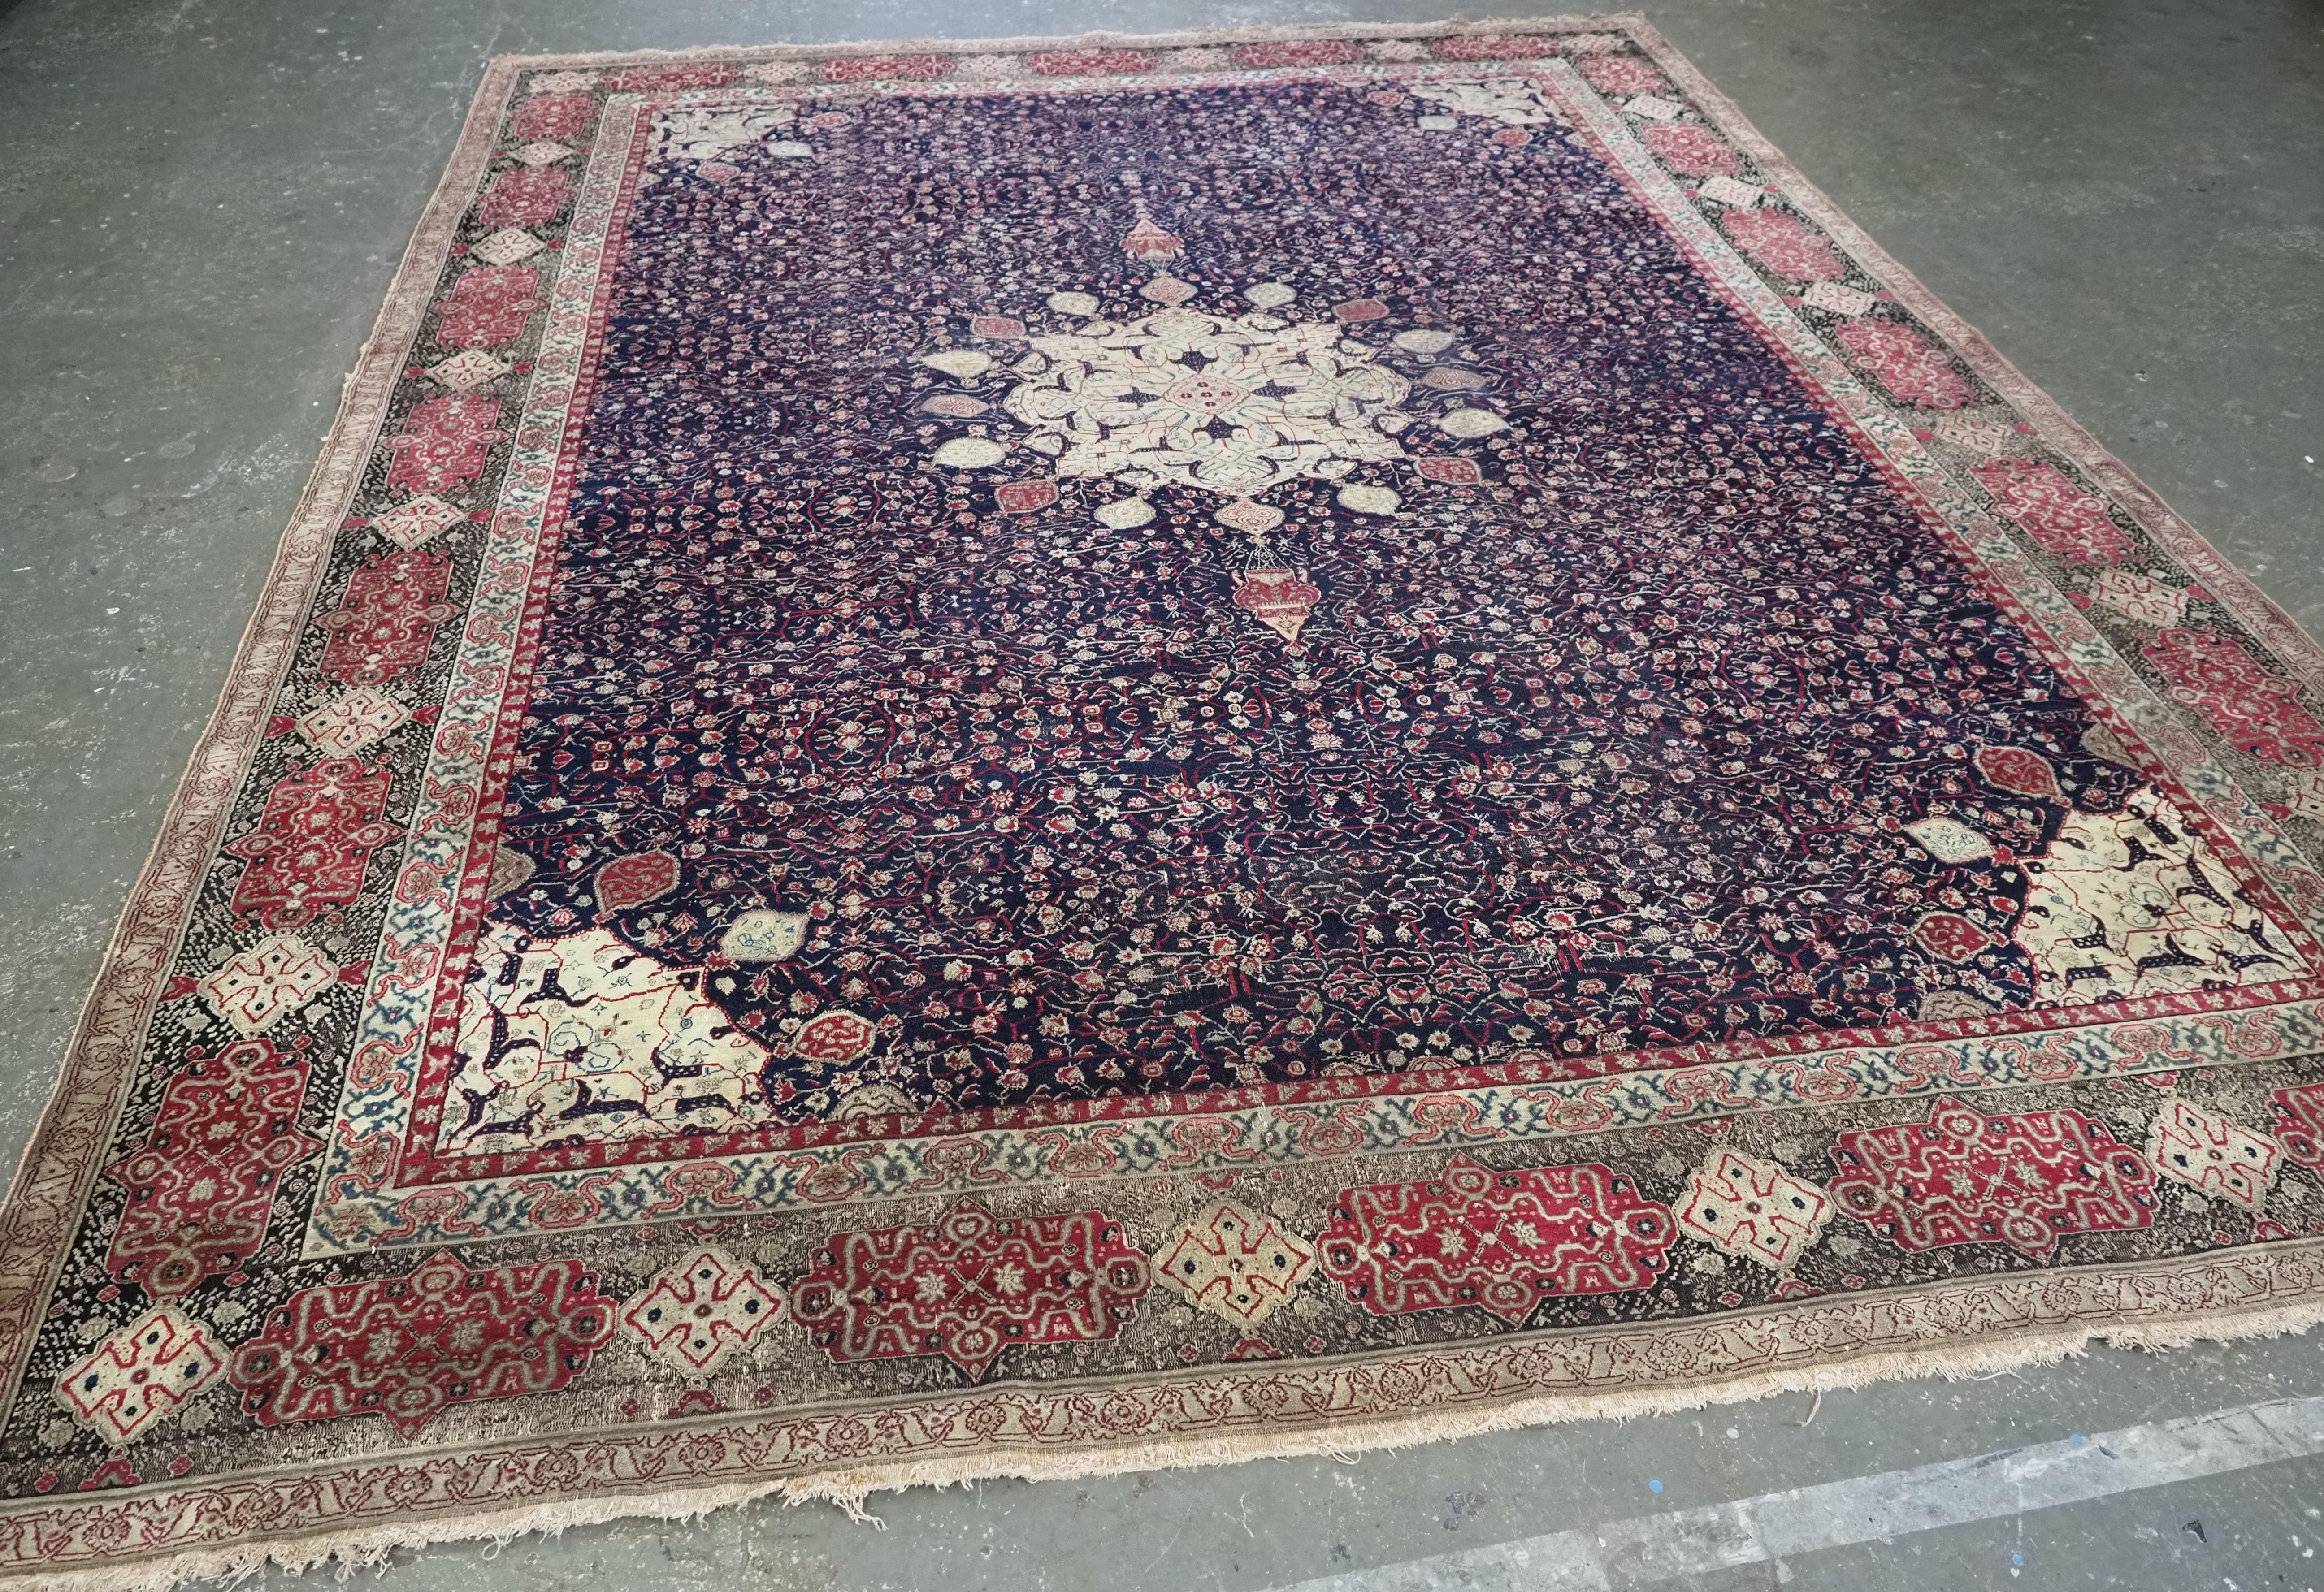 Size: 11ft 8in x 8ft 11in (355 x 273cm).

Antique Indian Agra carpet of 'Ardabil' design.

Circa 1880.

A superb and very finely woven Agra carpet, with the 16 lobed ivory coloured central circular medallion, with lanterns hanging at each end. The